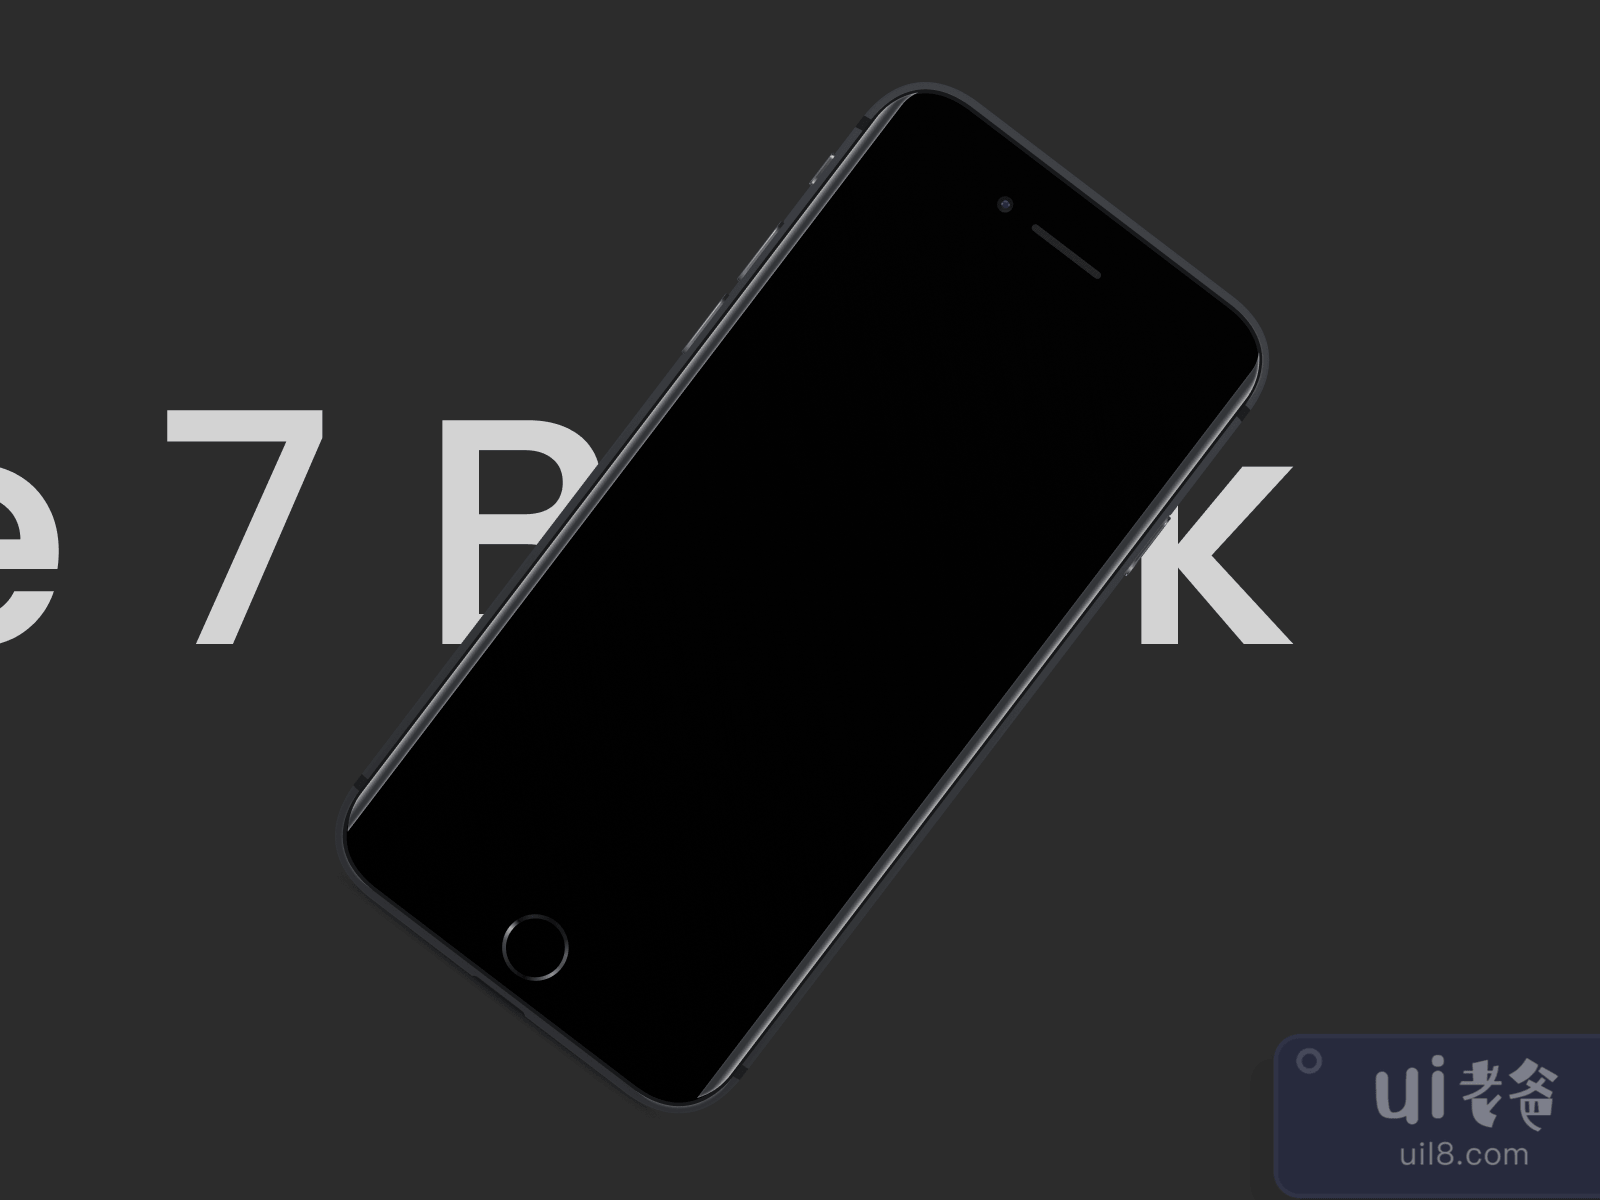 iPhone 7 Black Mockup for Figma and Adobe XD No 2